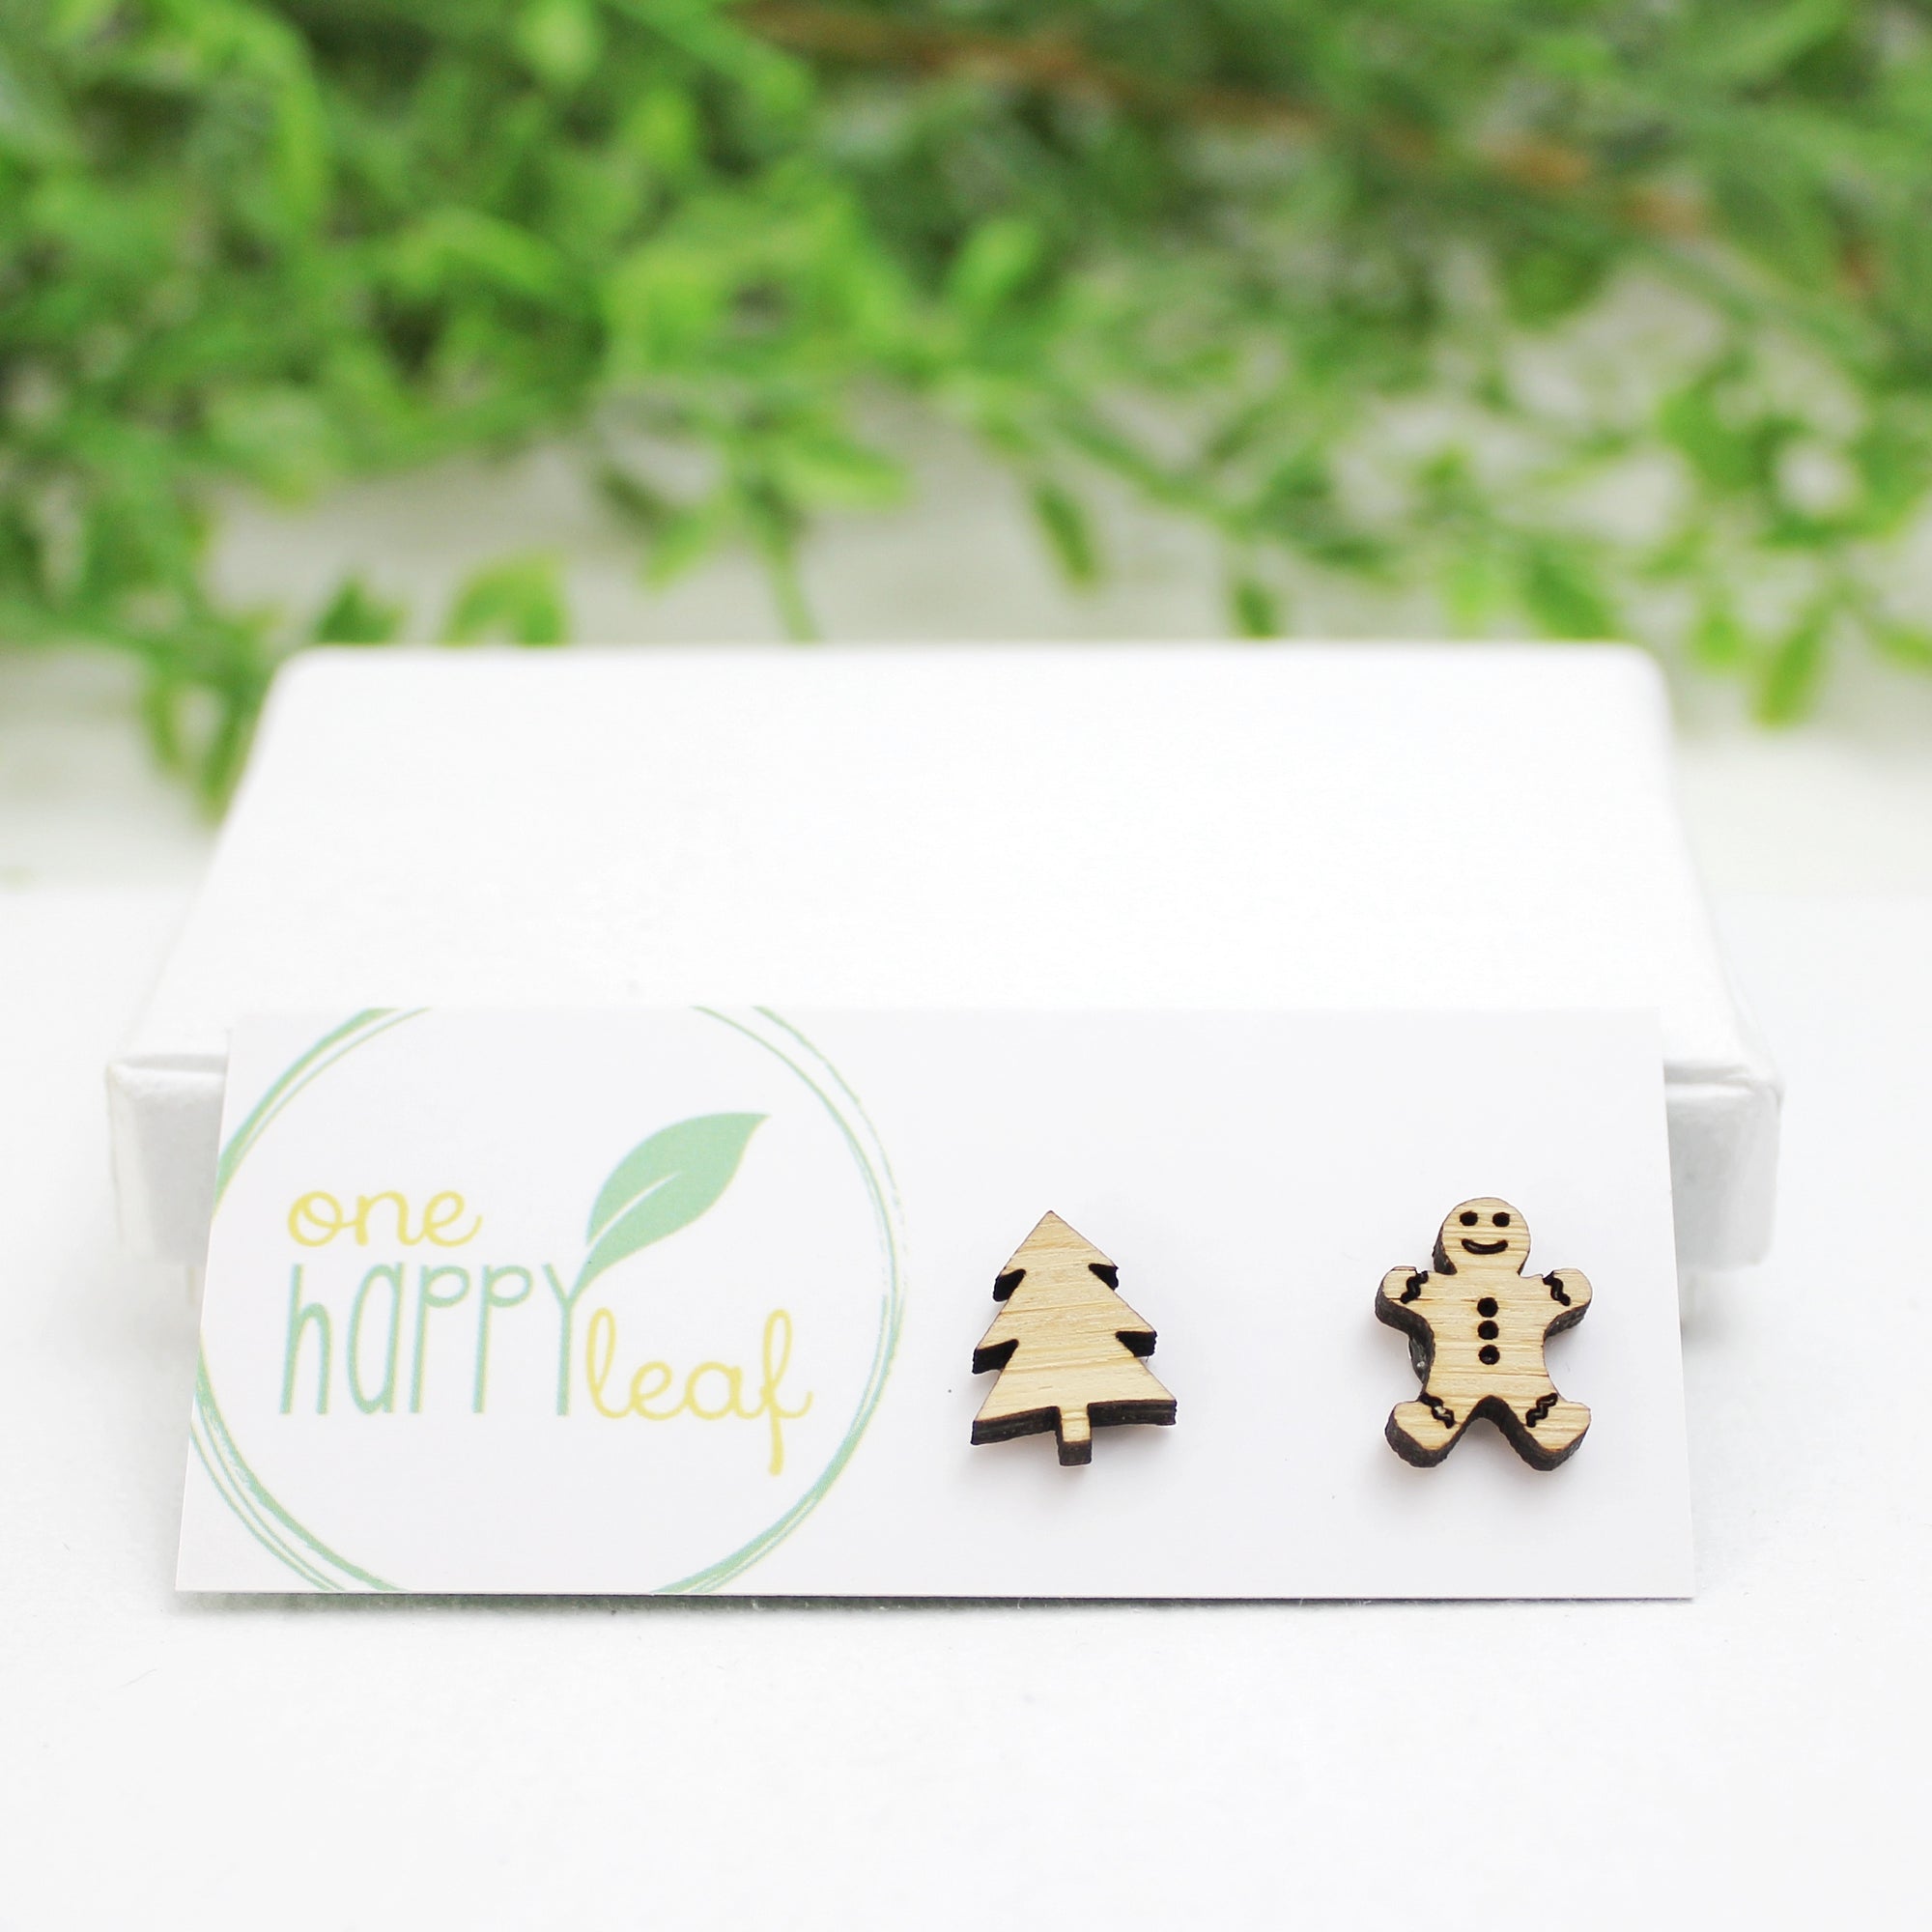 Gingerbread men and tree studs